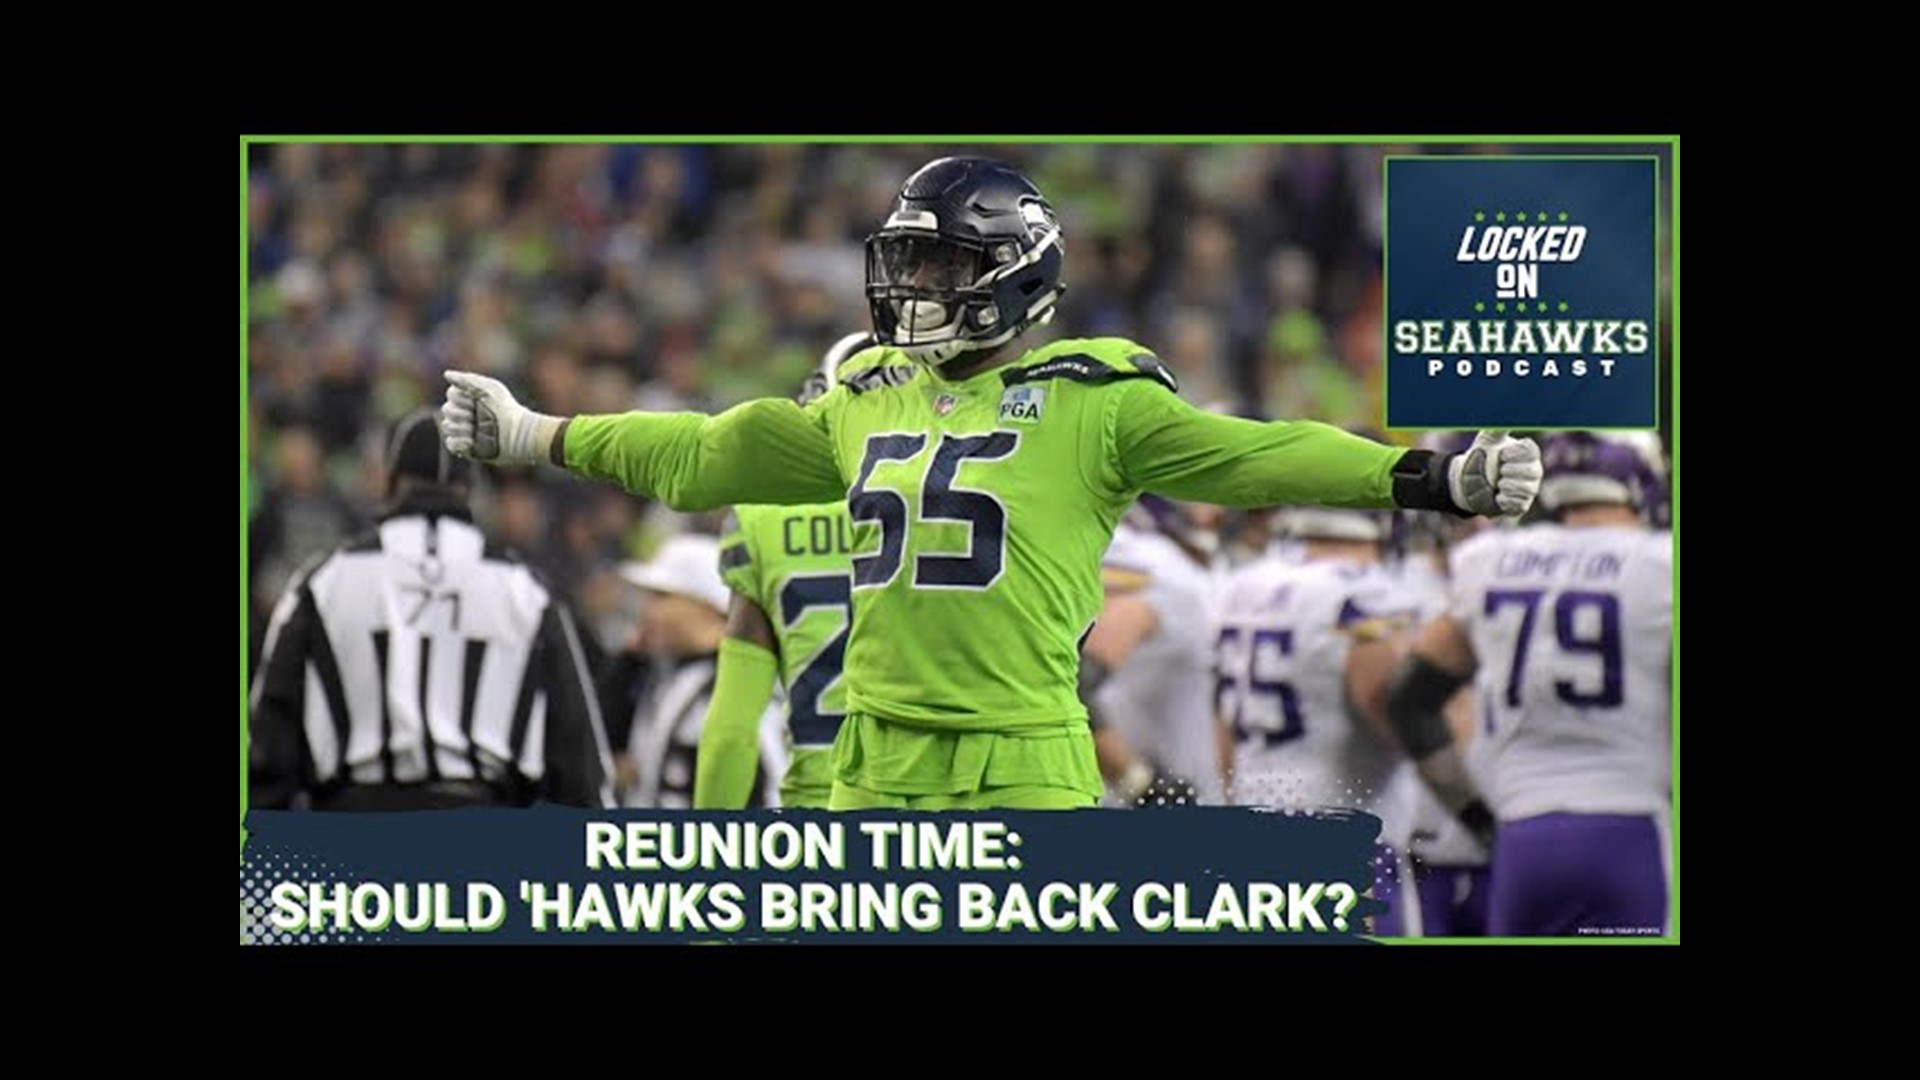 After four years away in Kansas City, former Seahawks draft pick Frank Clark remains unsigned on the free agent market searching for a new team. Should he come back?